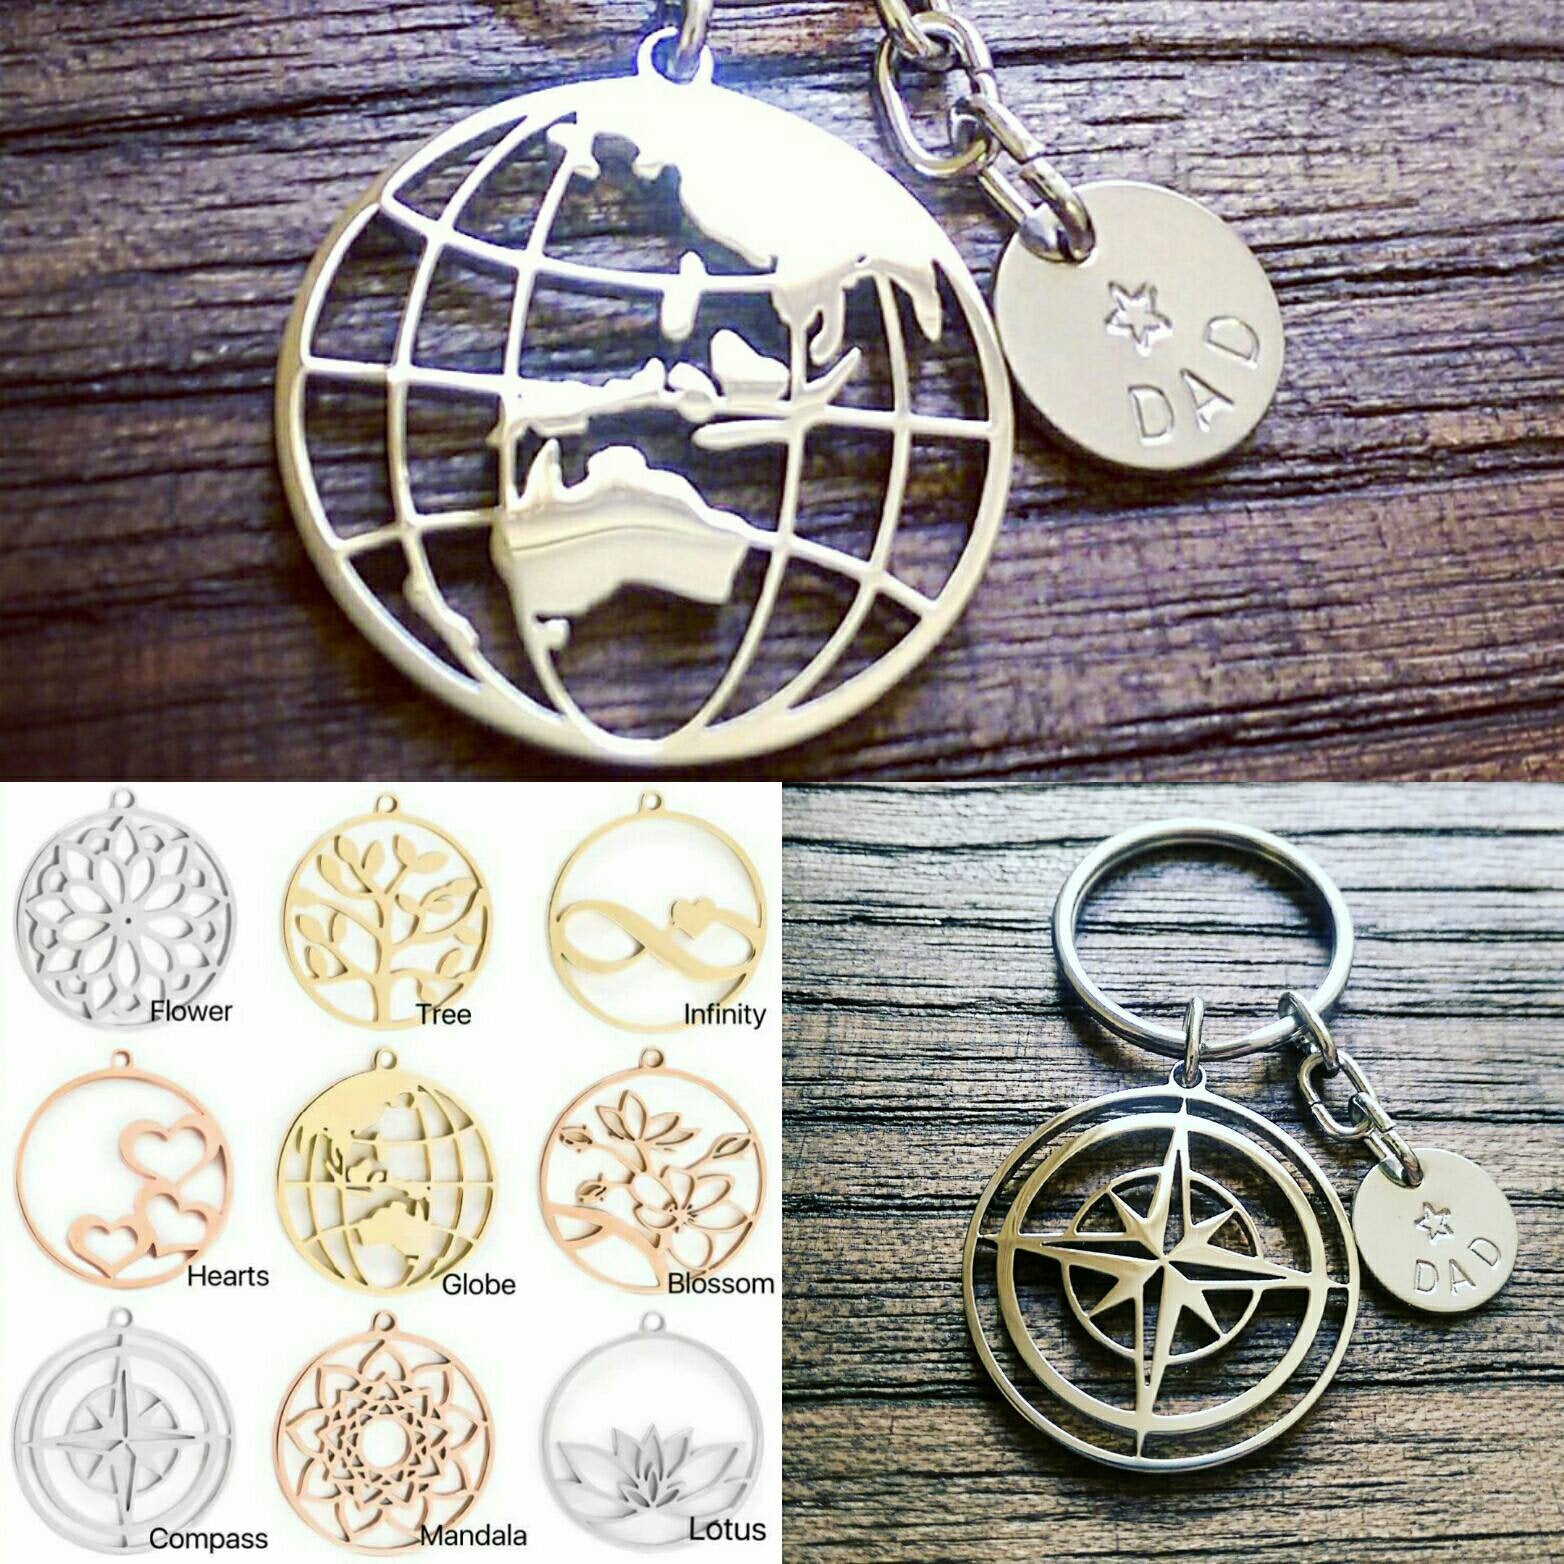 Personalised Keyrings, Design your own Charm Keyrings Hand Stamped Disc - Silver and Resin Designs